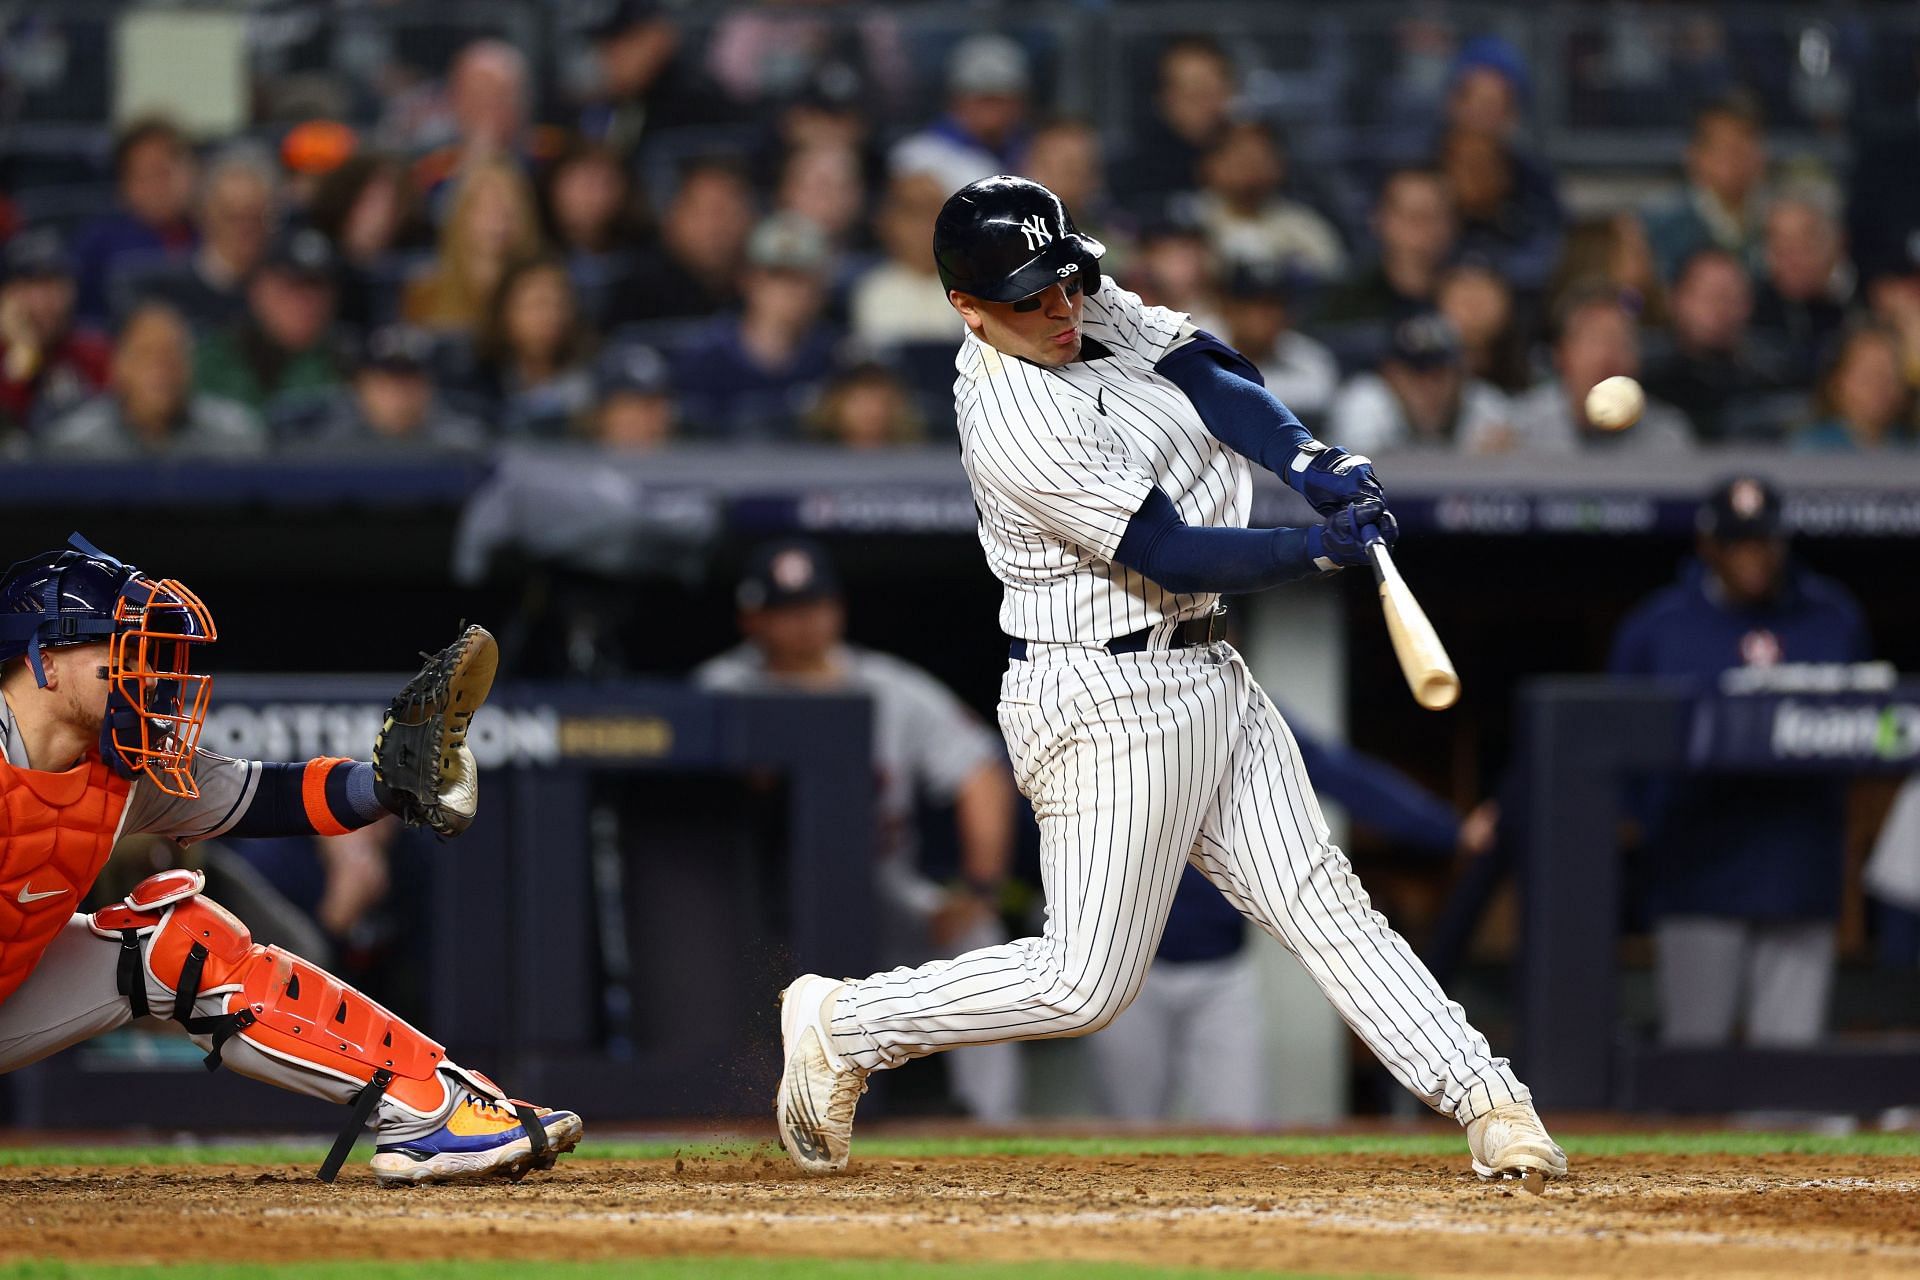 Catcher tandem led by Jose Trevino key to Yankees success